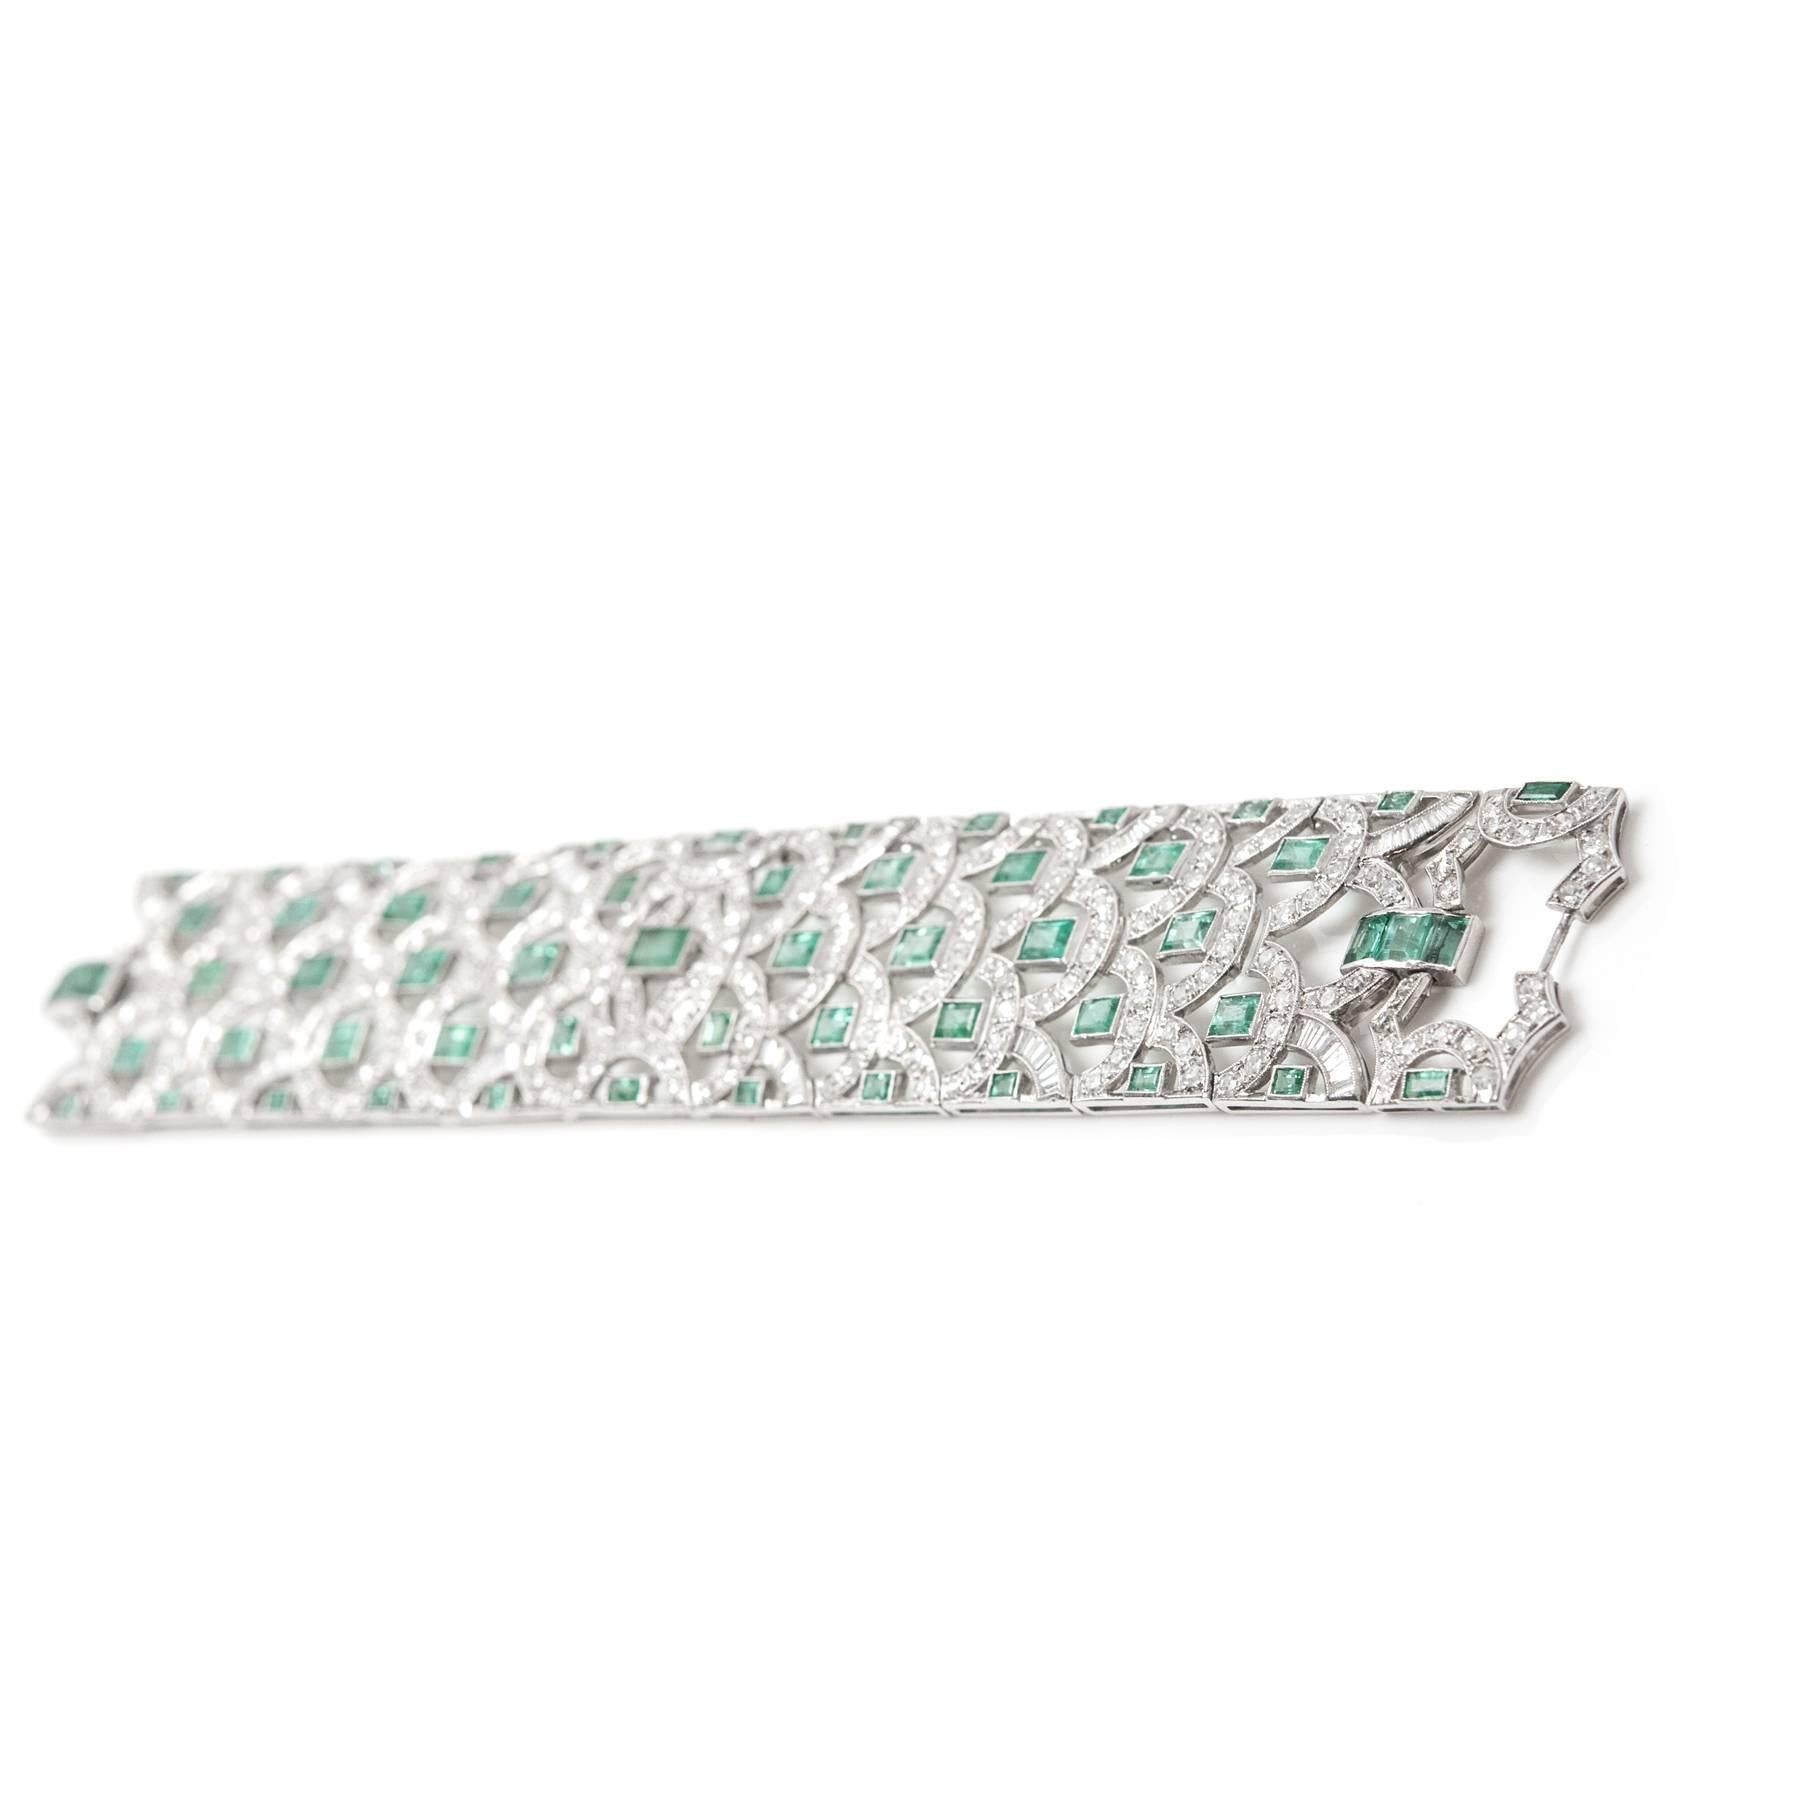 Ladies handmade Platinum scroll motif bracelet set with fifty-nine mixed cut Emeralds weighing 19 carats, additionally  et with tapered baguette cut, single cut, and old European cut diamonds weighing  approximately 11.5 carats.  Approximately 7.5”